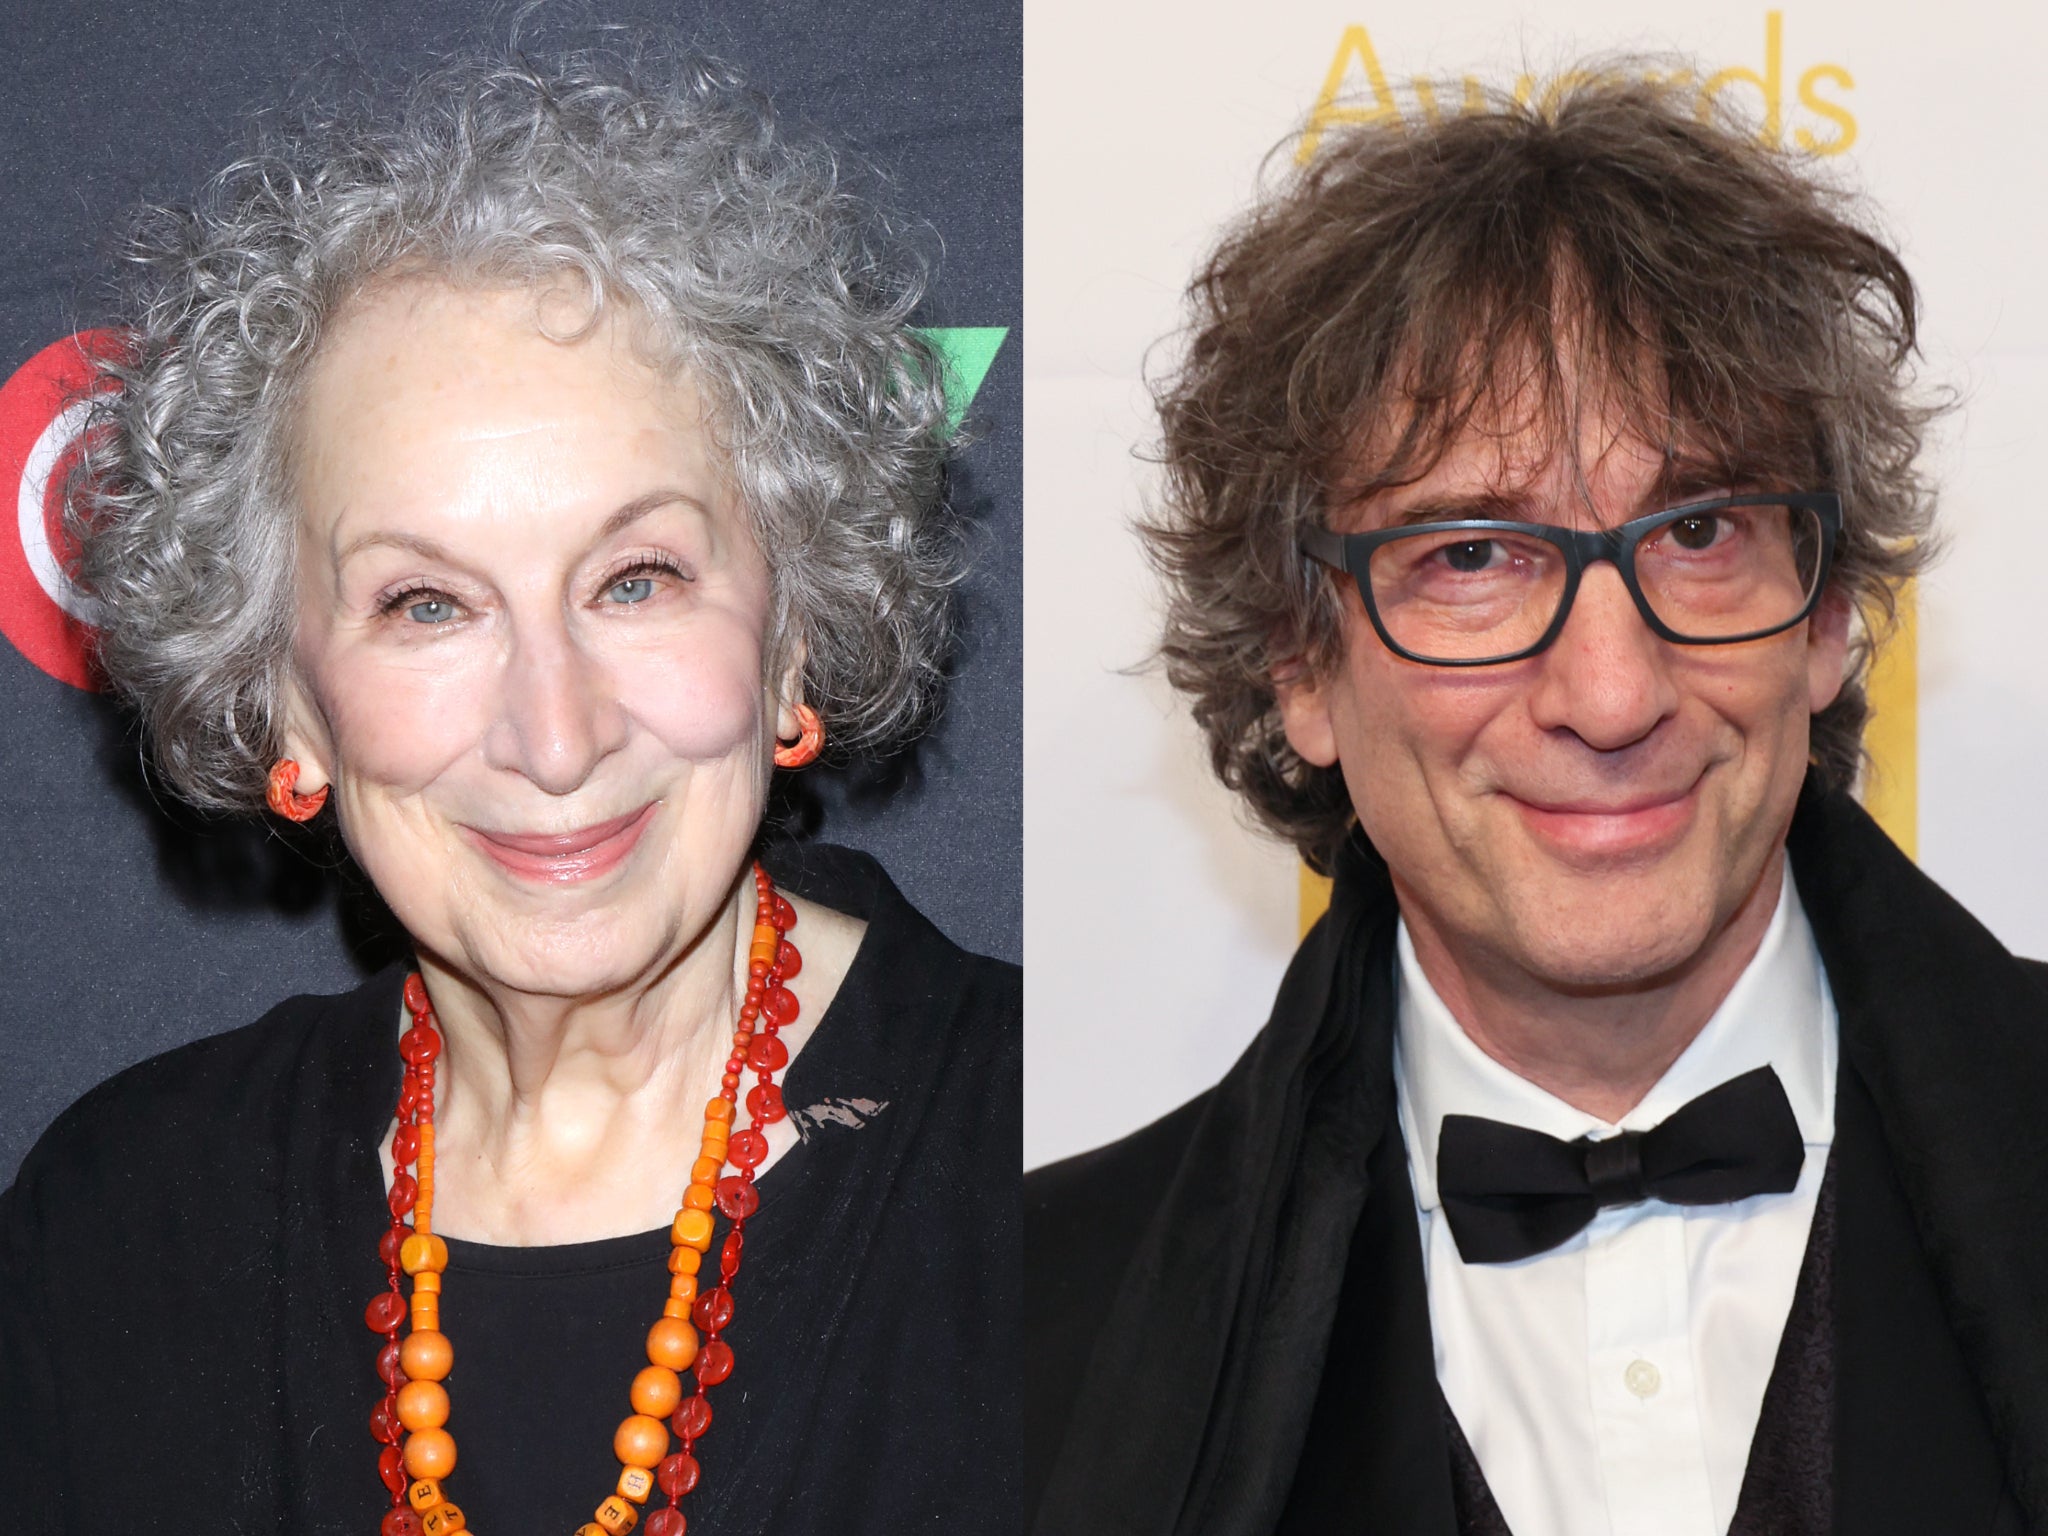 Margaret Atwood and Neil Gaiman